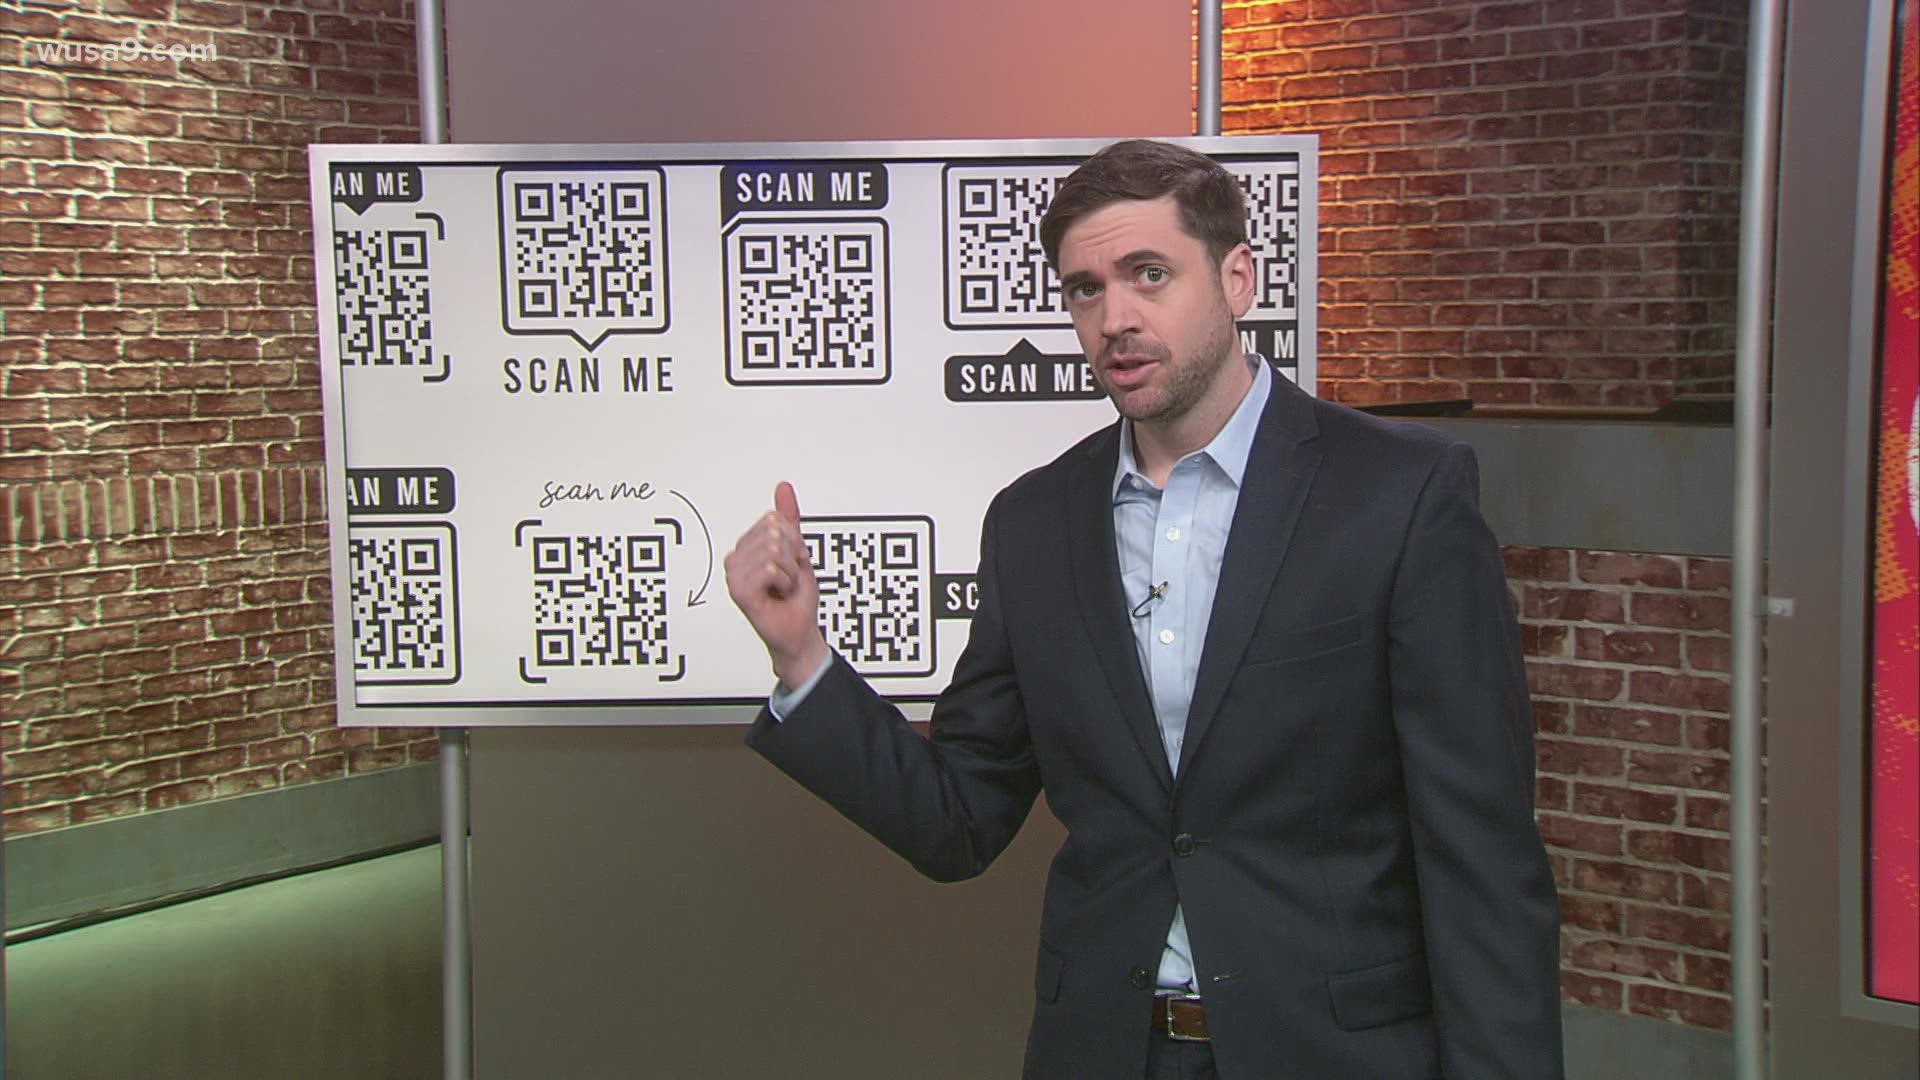 "You don't want to be just scanning any QR code."